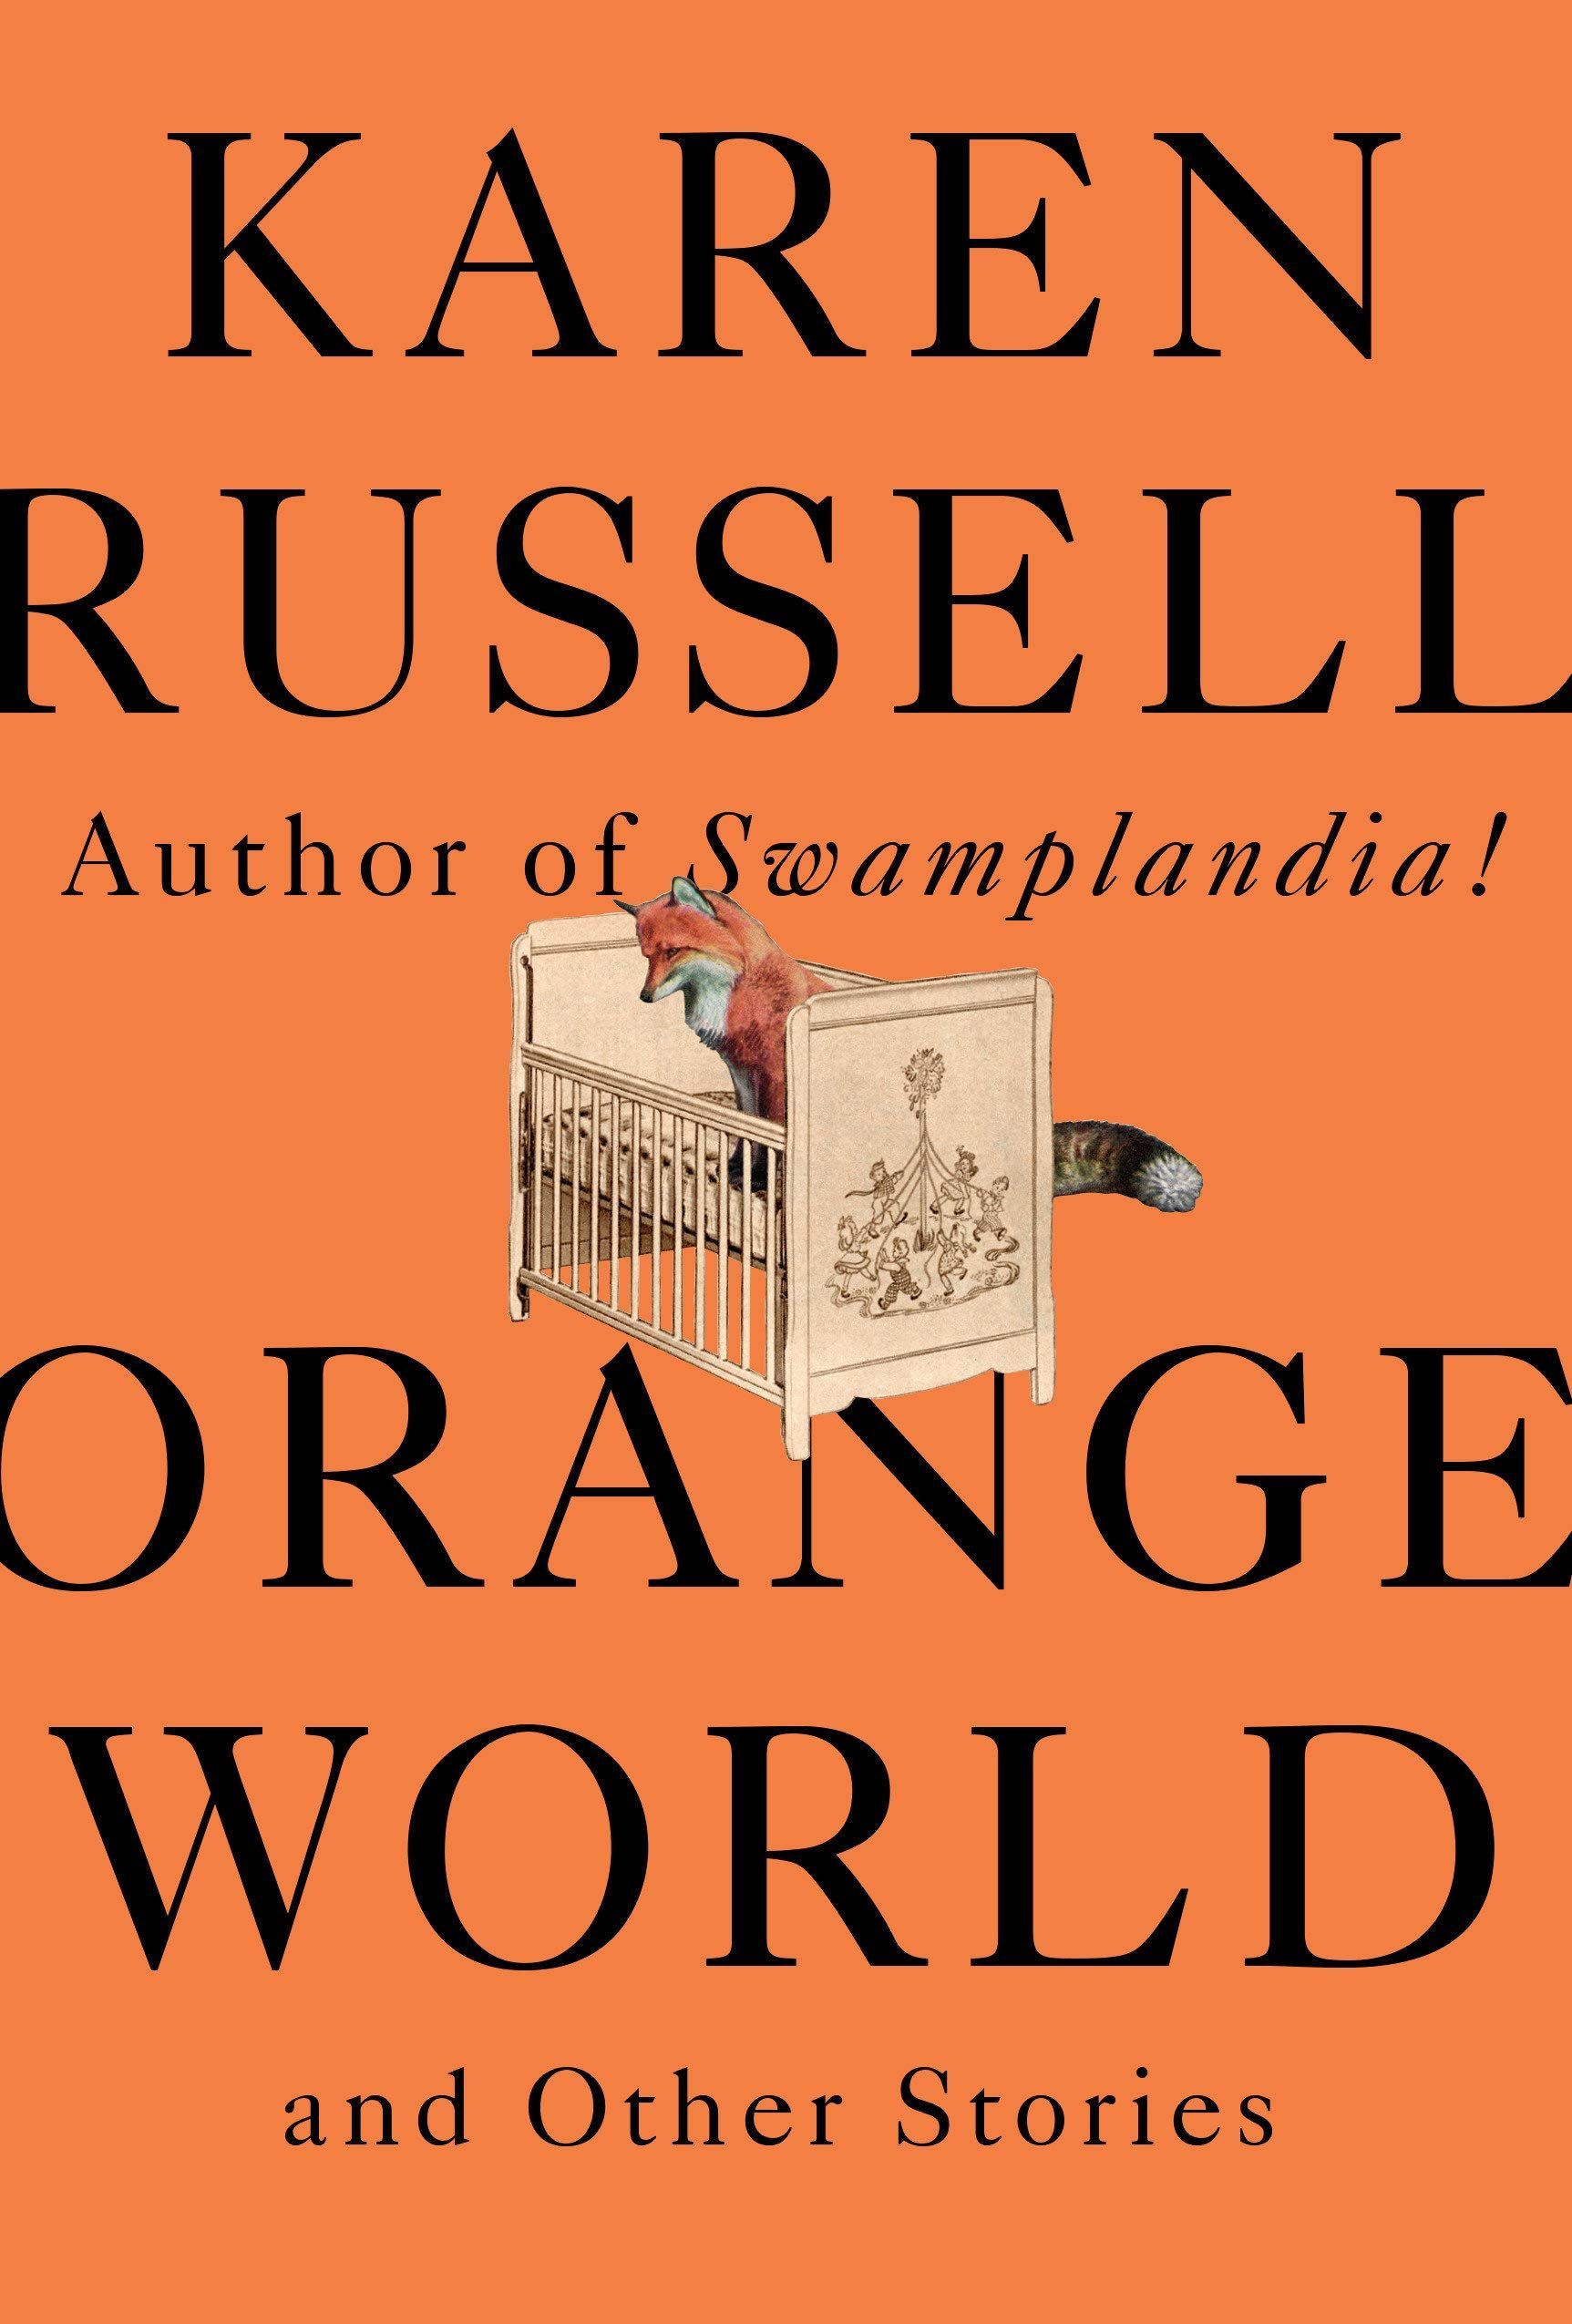 Voices Against the Wall: The Hilarious Terror of Karen Russell’s “Orange World and Other Stories”